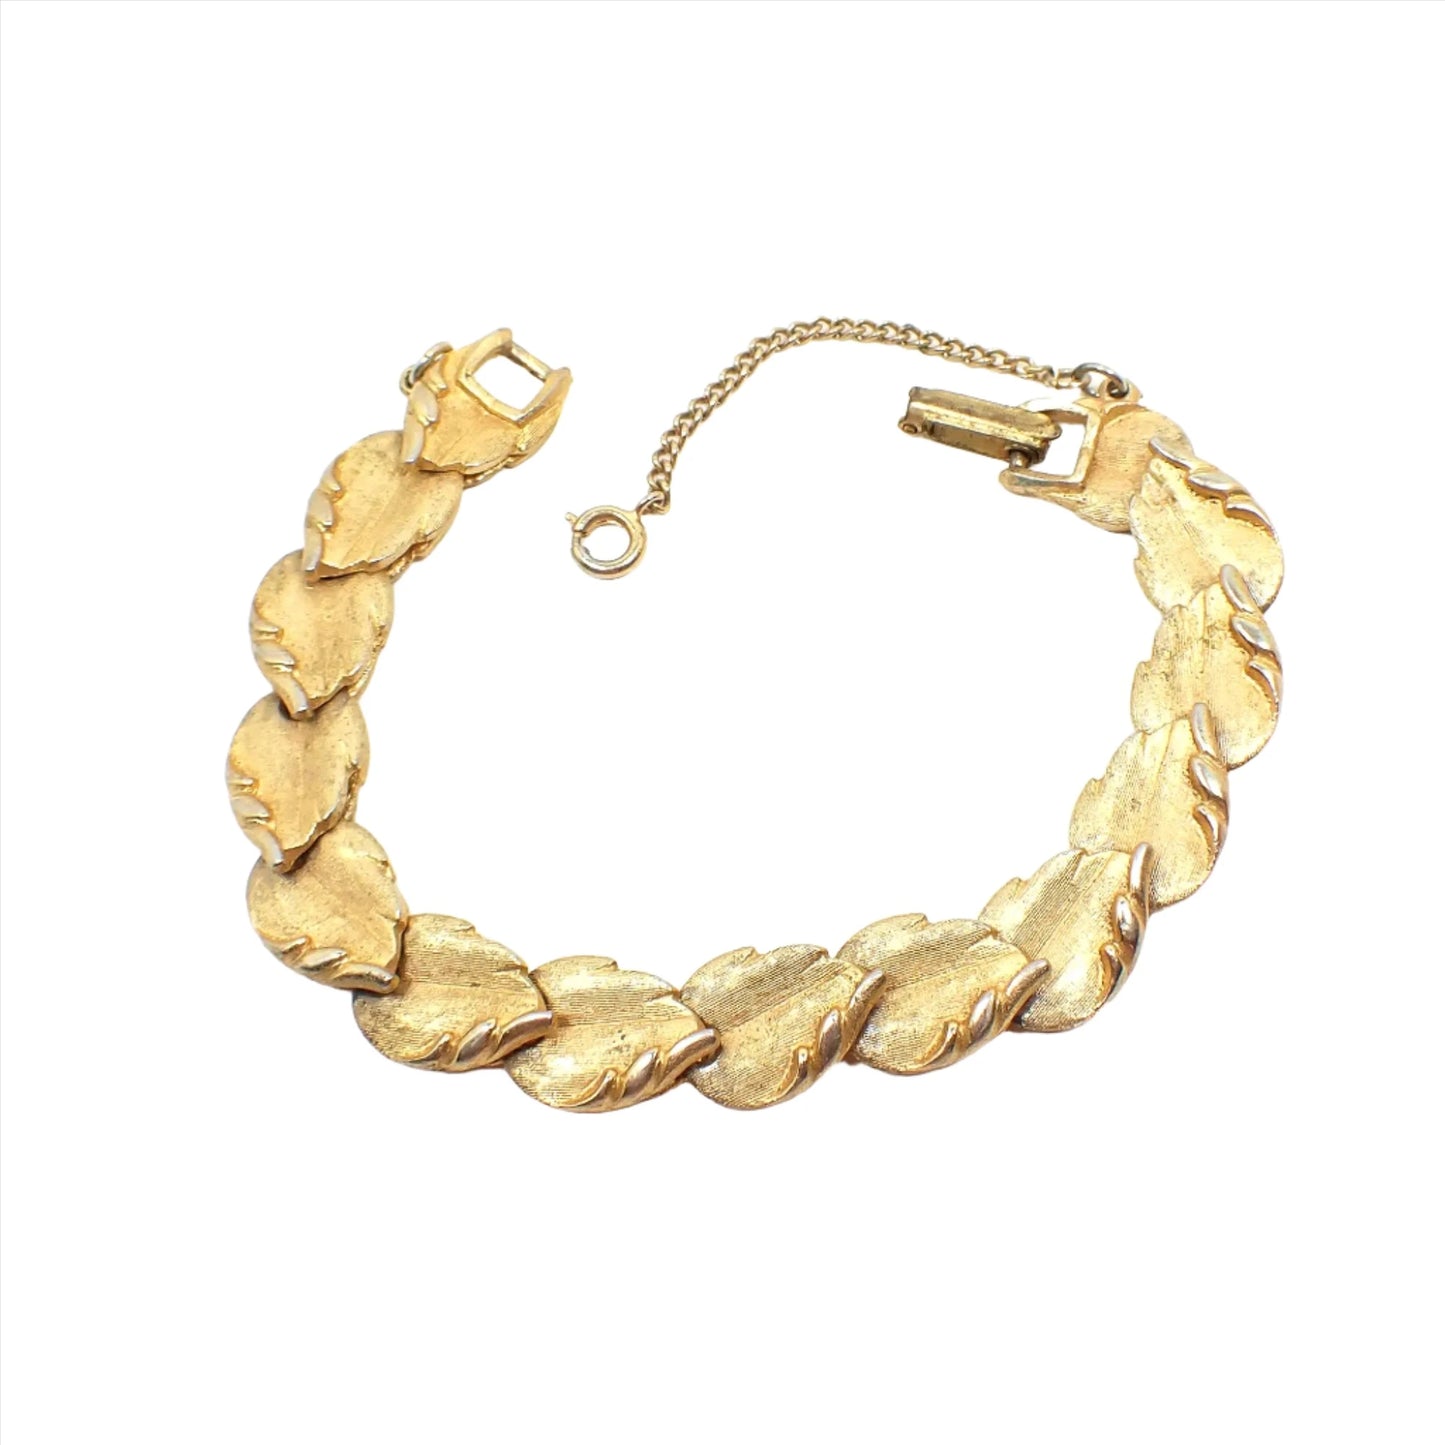 Top view of the Mid Century vintage link bracelet. The metal is textured and gold tone in color. Each link is shaped like a leaf with a curled edge. There is a snap lock clasp and safety chain at the end. 